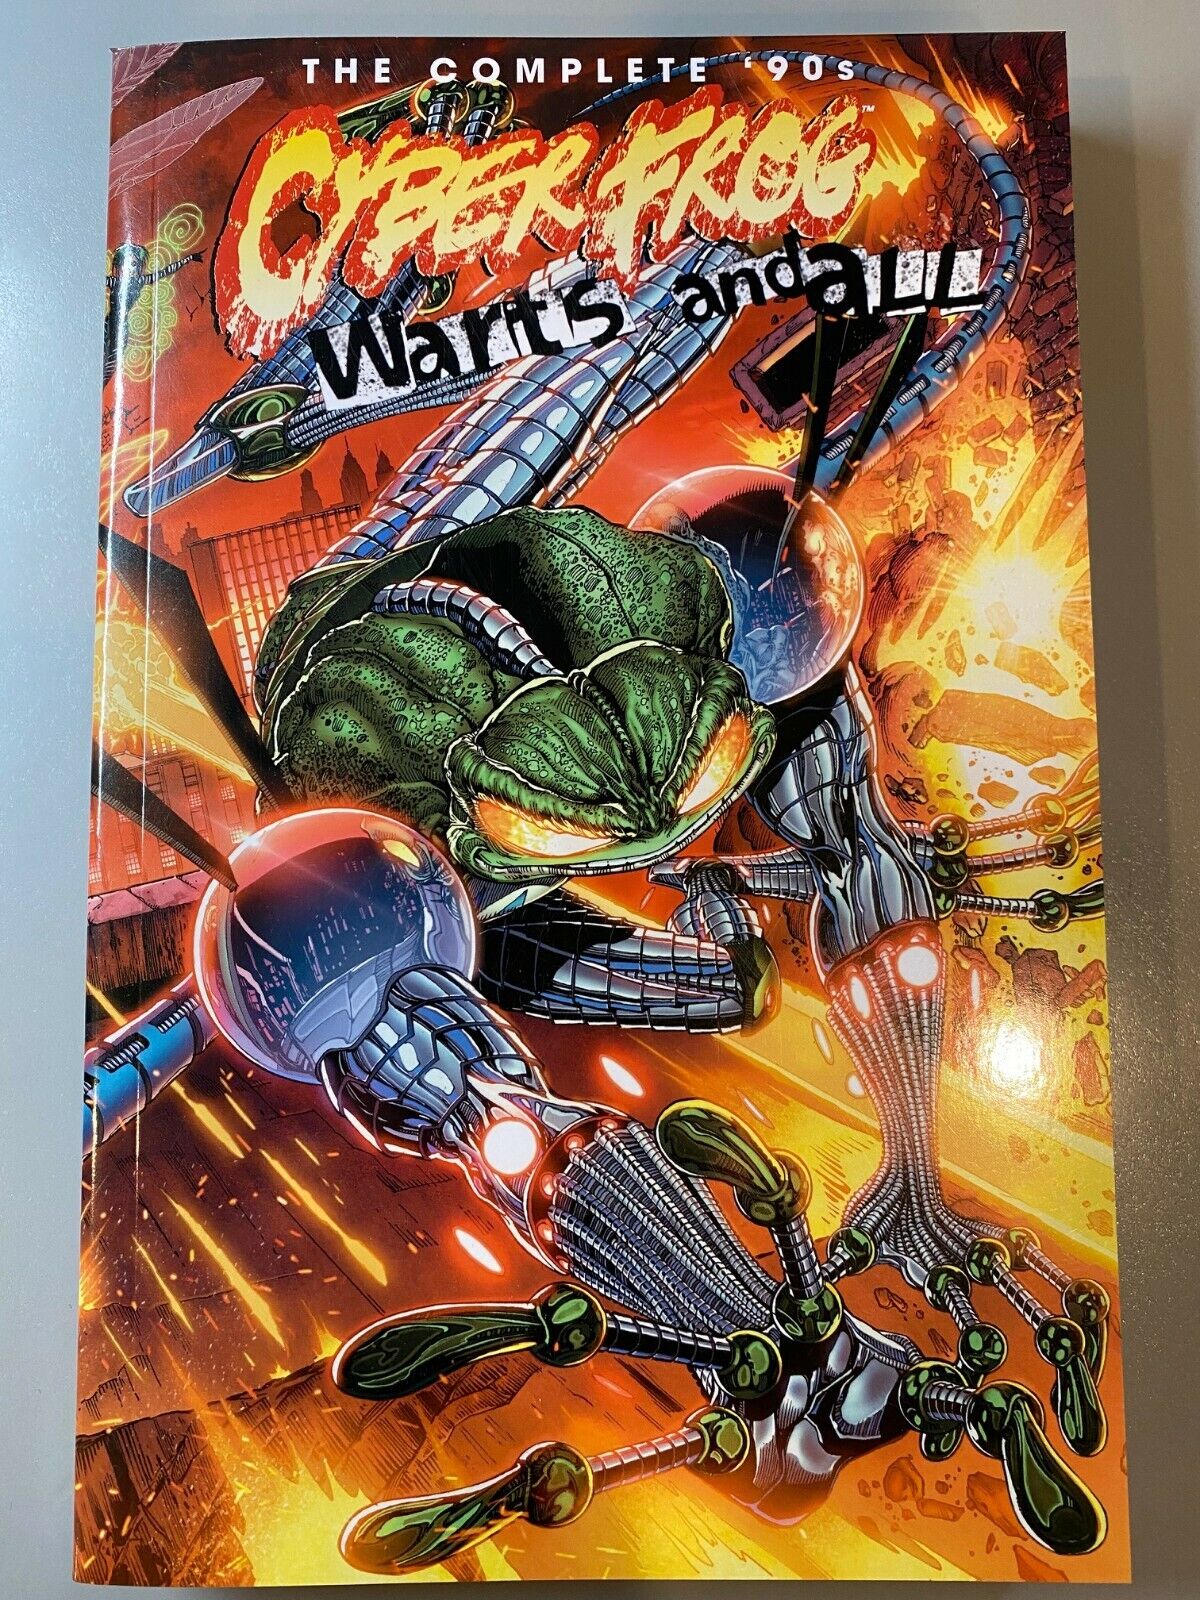 Complete '90s CYBERFROG: WARTS AND ALL TPB Softcover collection